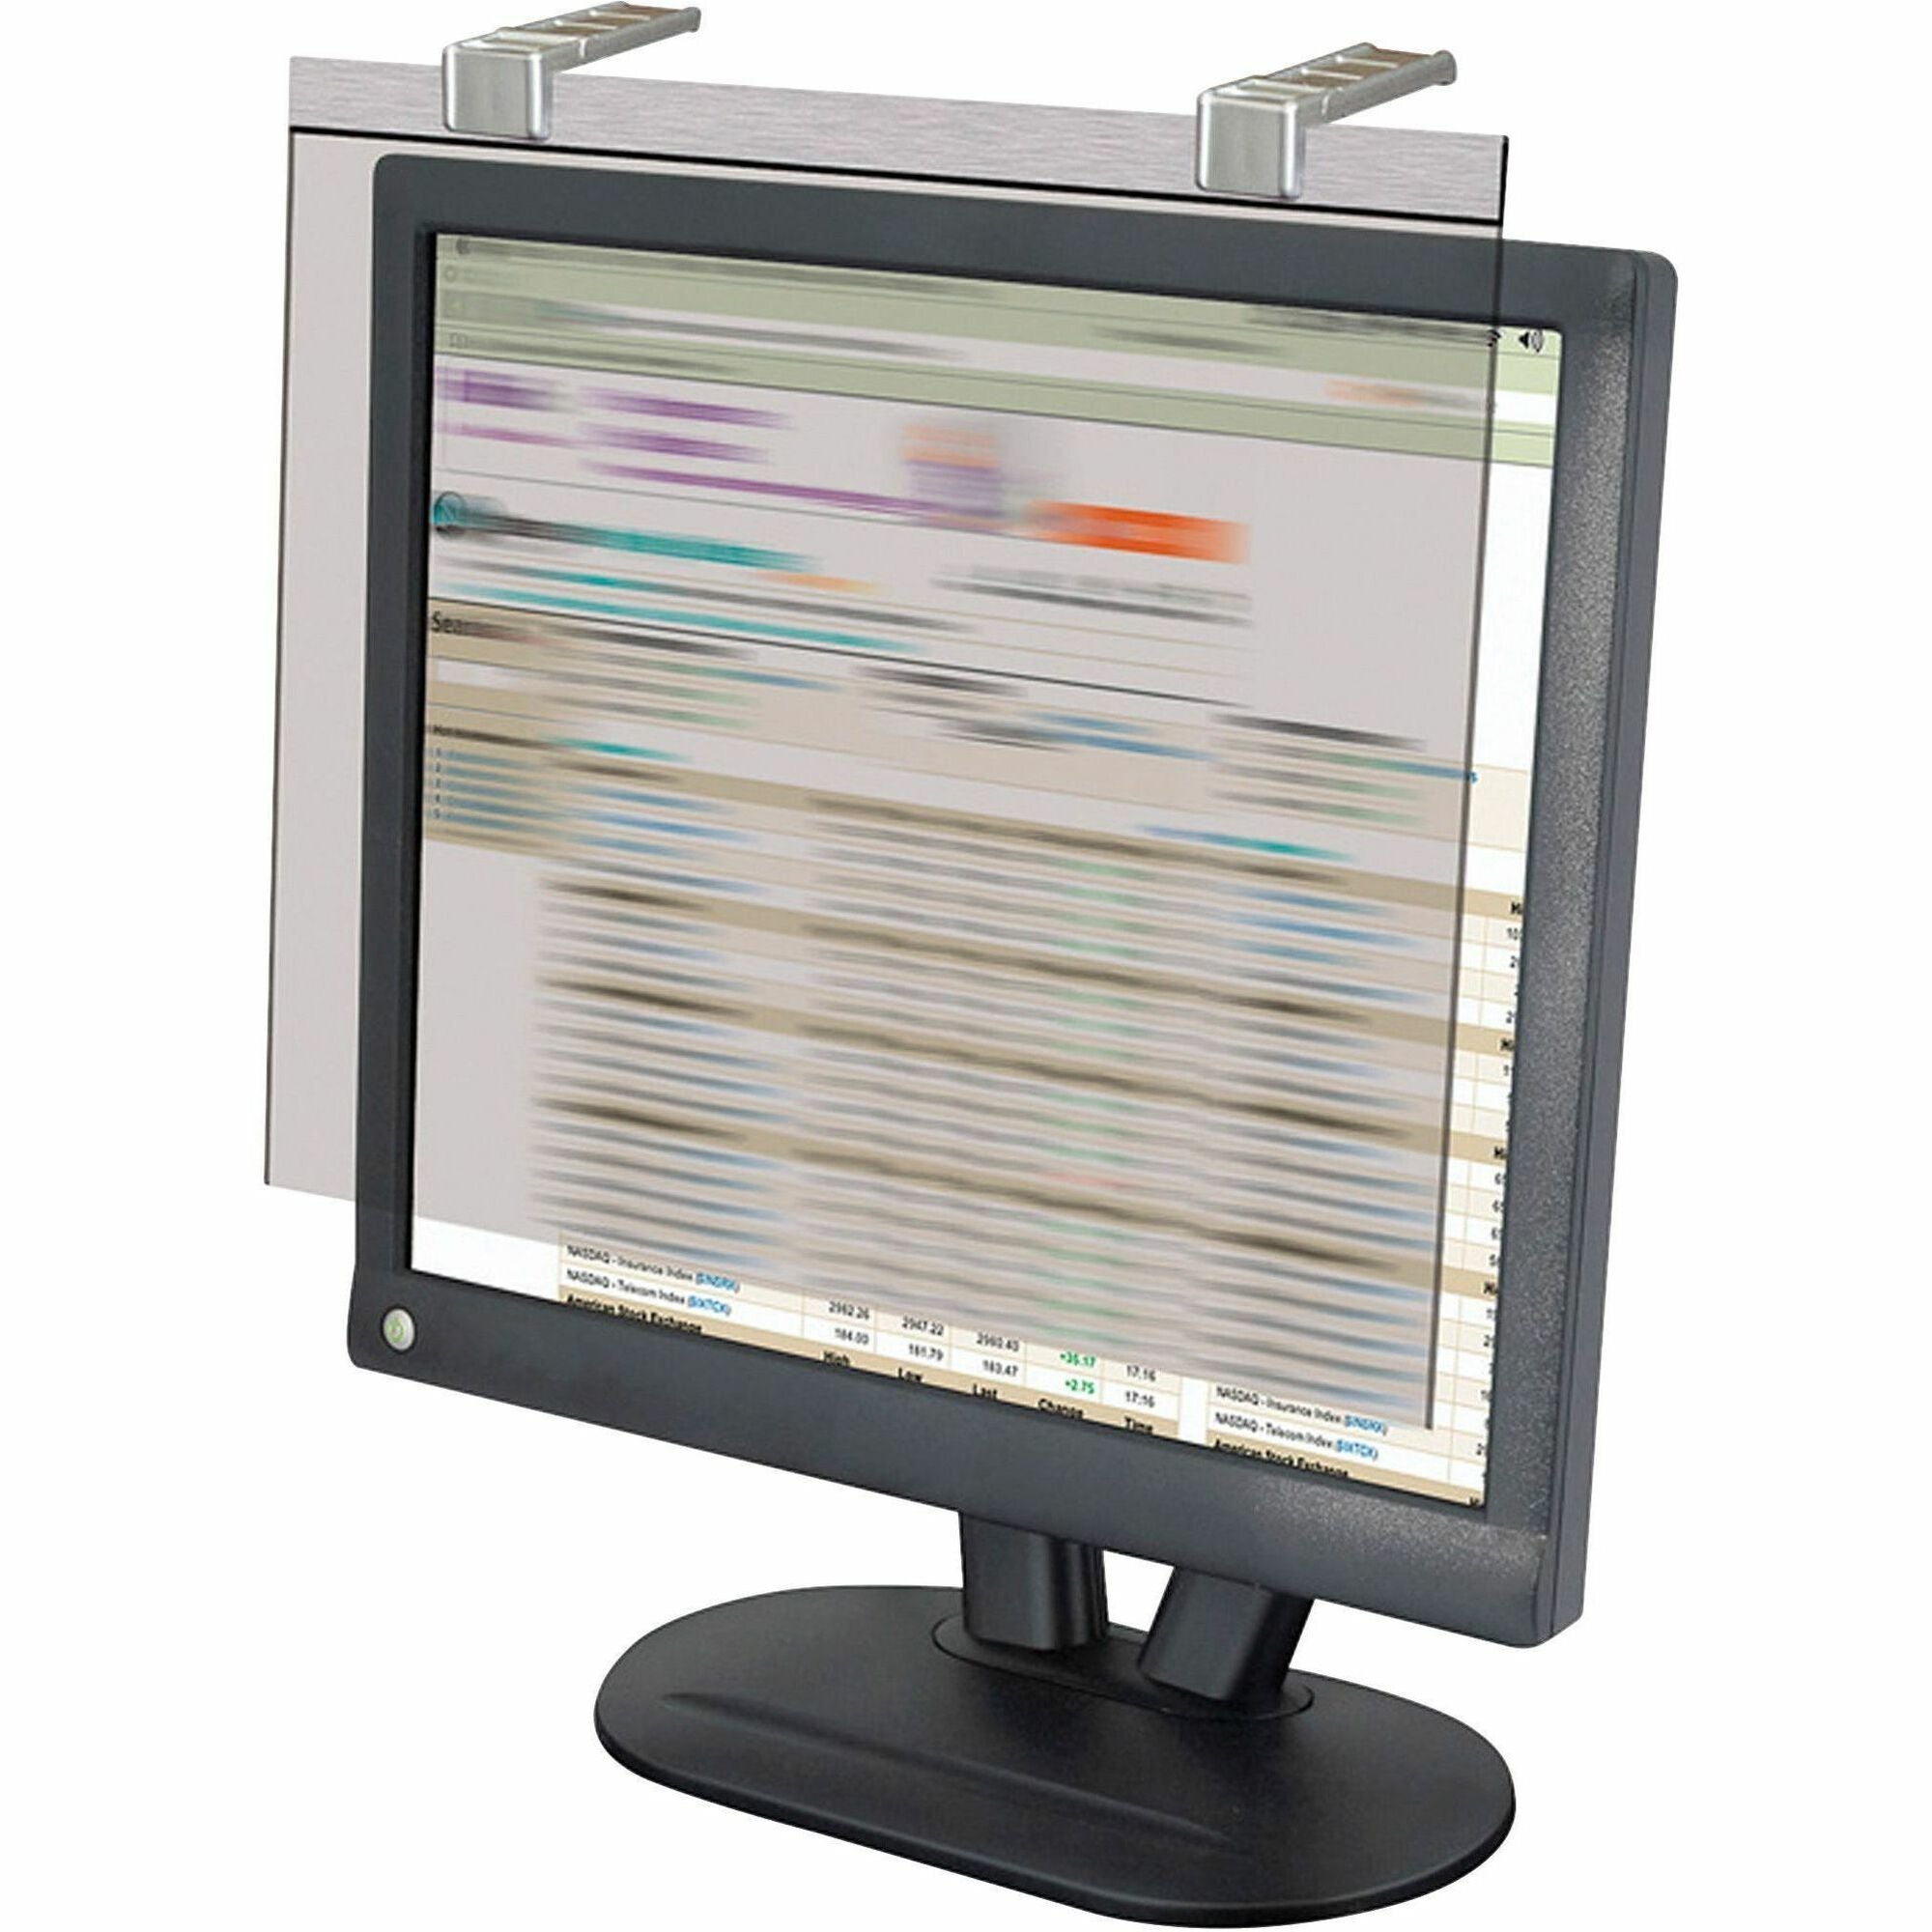 Kantek LCD Protective Privacy / Anti-Glare Filters - For 15"LCD Monitor - Scratch Resistant - Anti-glare - 1 Pack - 1